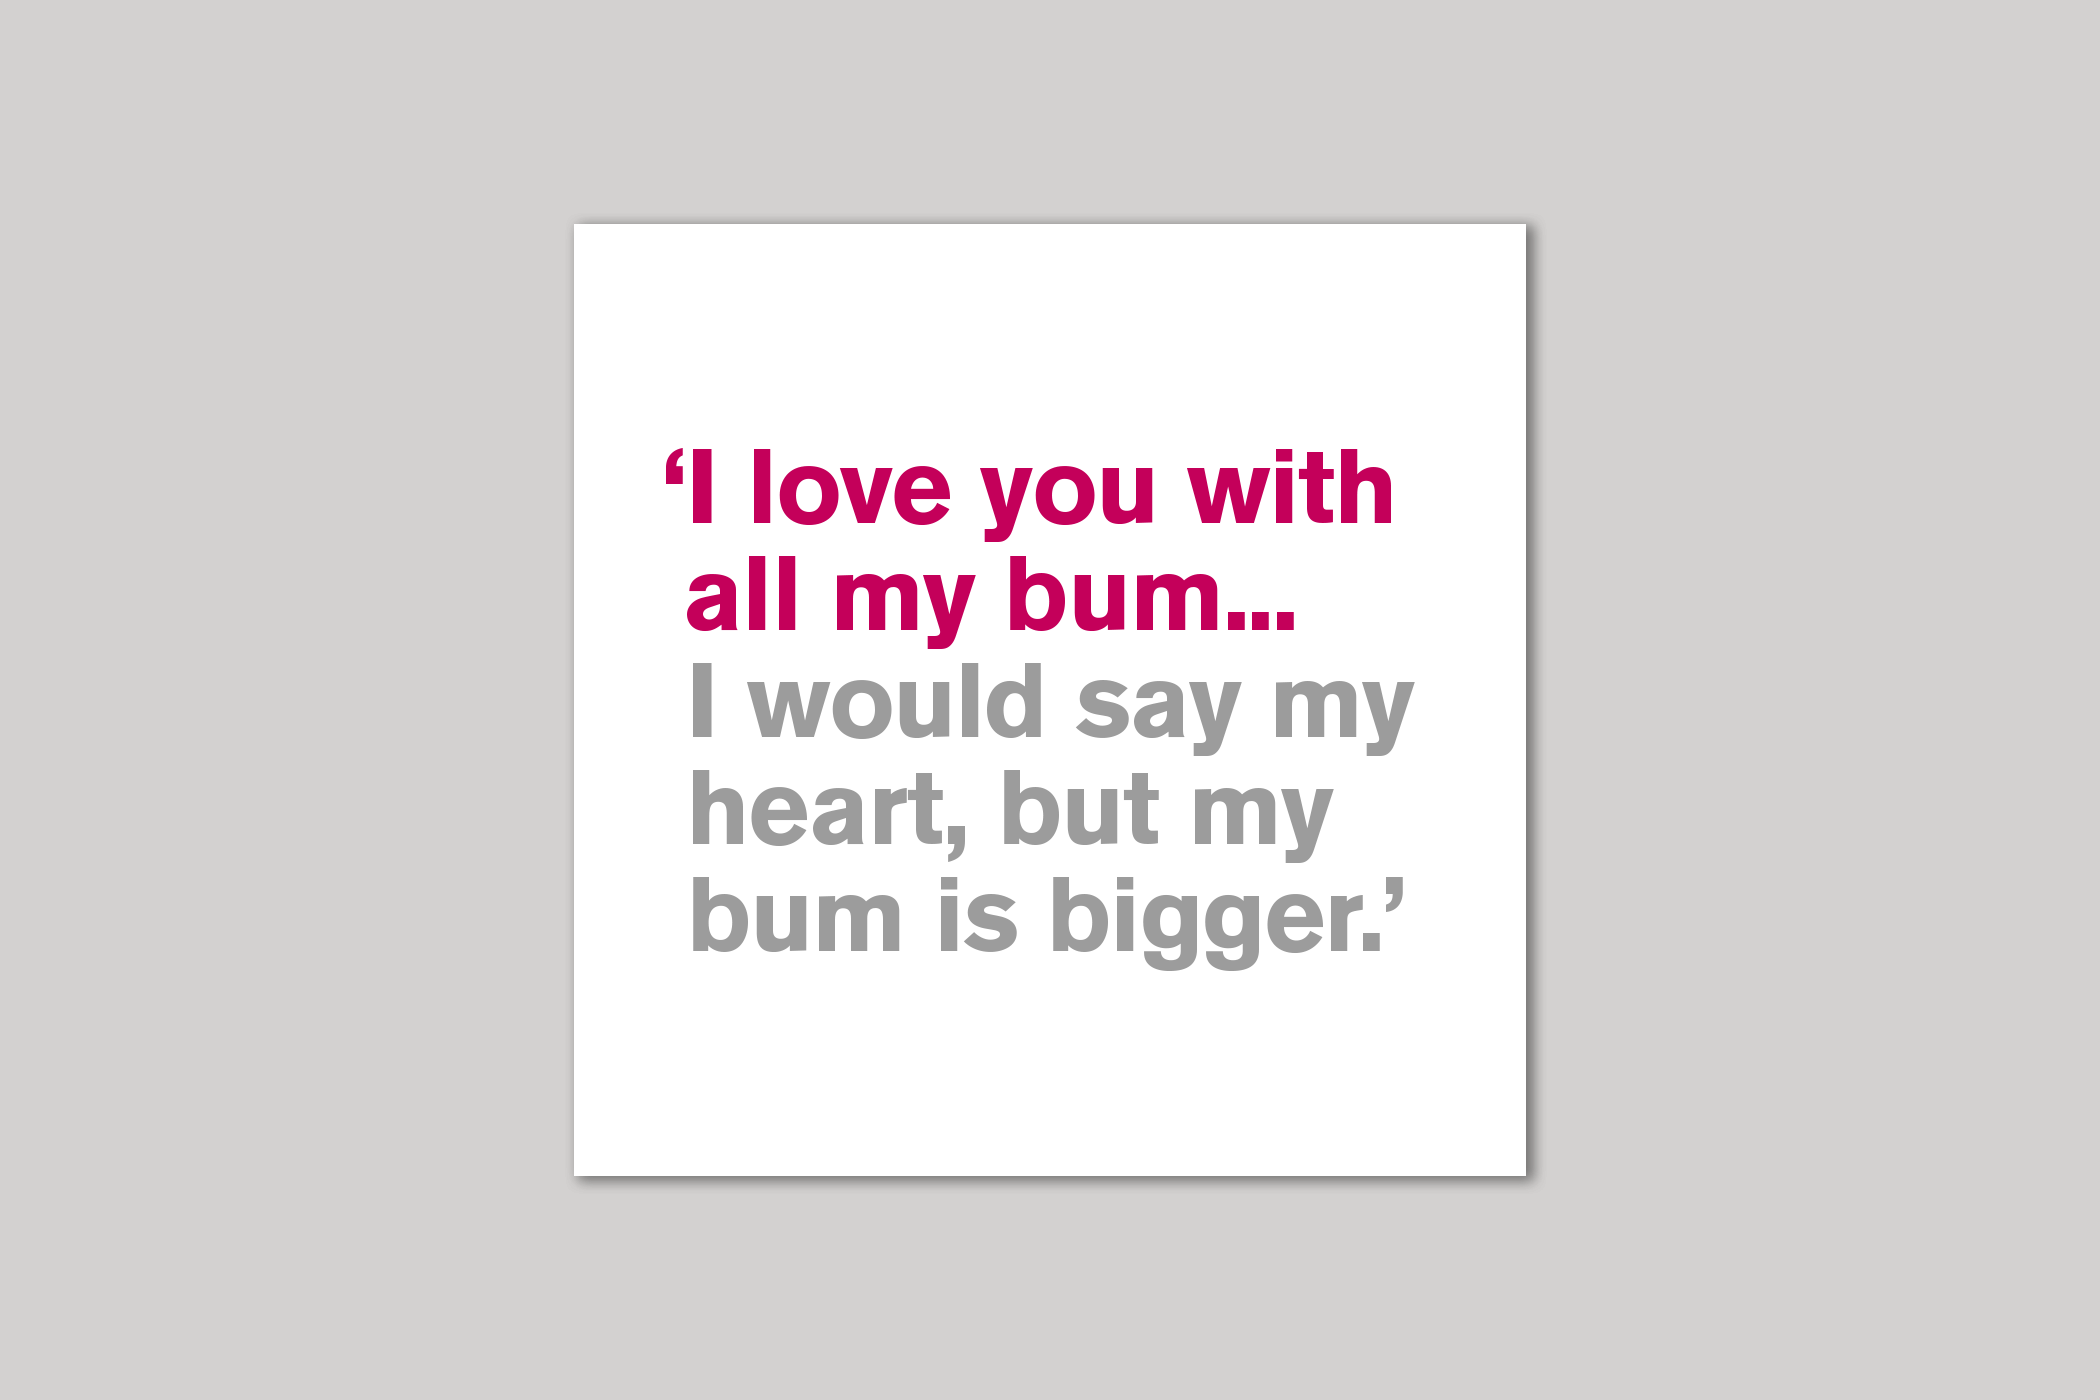 All My Bum from Lyric range of quotation cards by Icon.